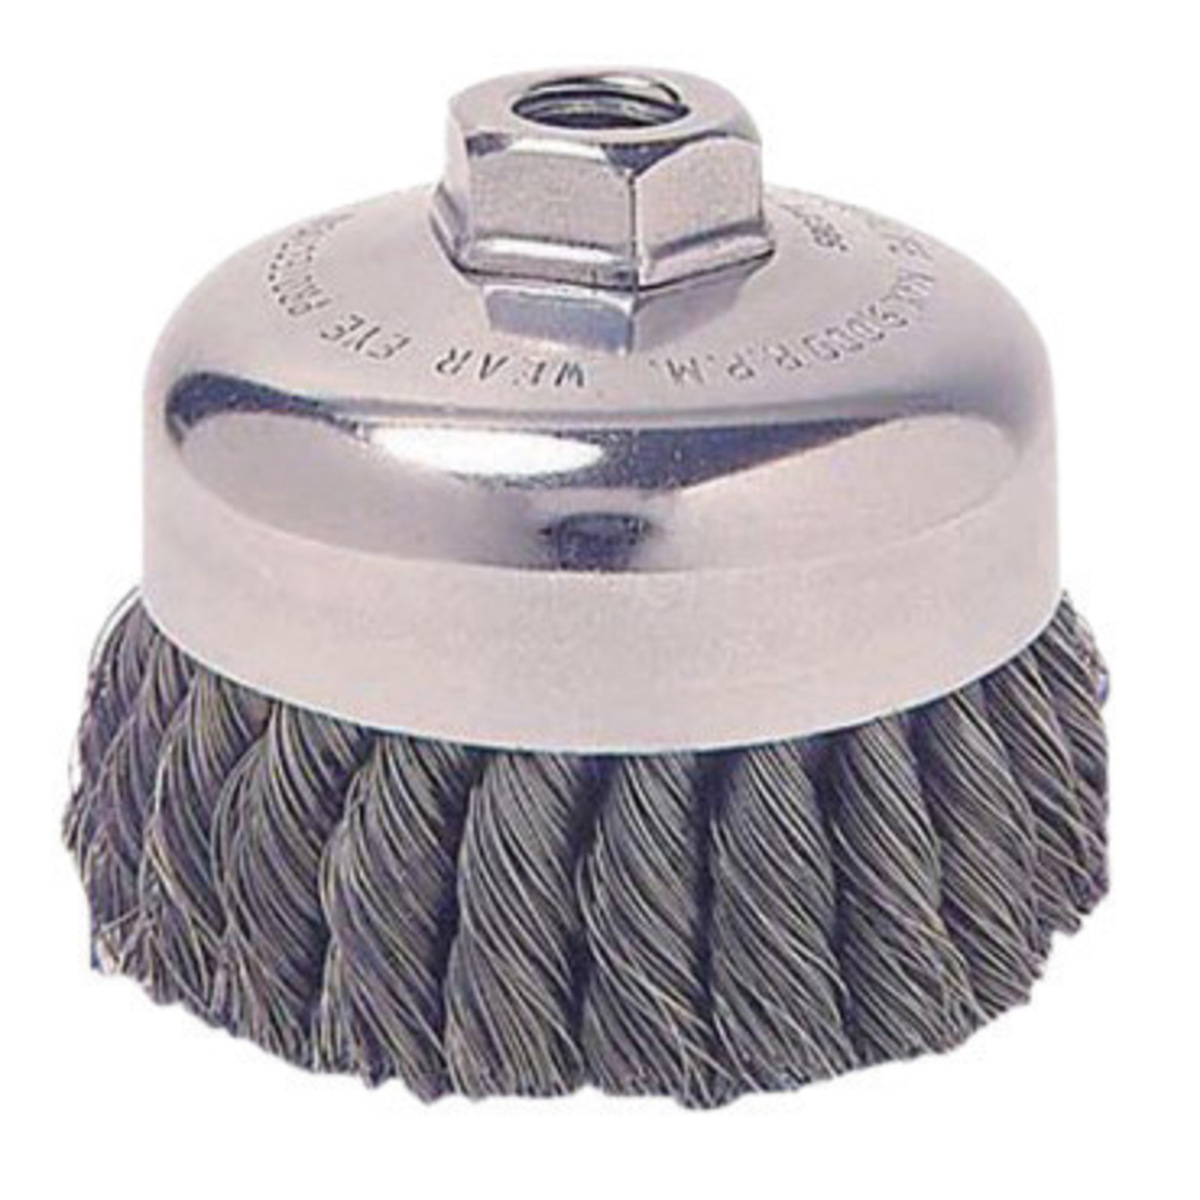 4 Inch Max 8500 Twist Wire Cup Brush Twisted Knotted Fits Abrasive Grinders New 